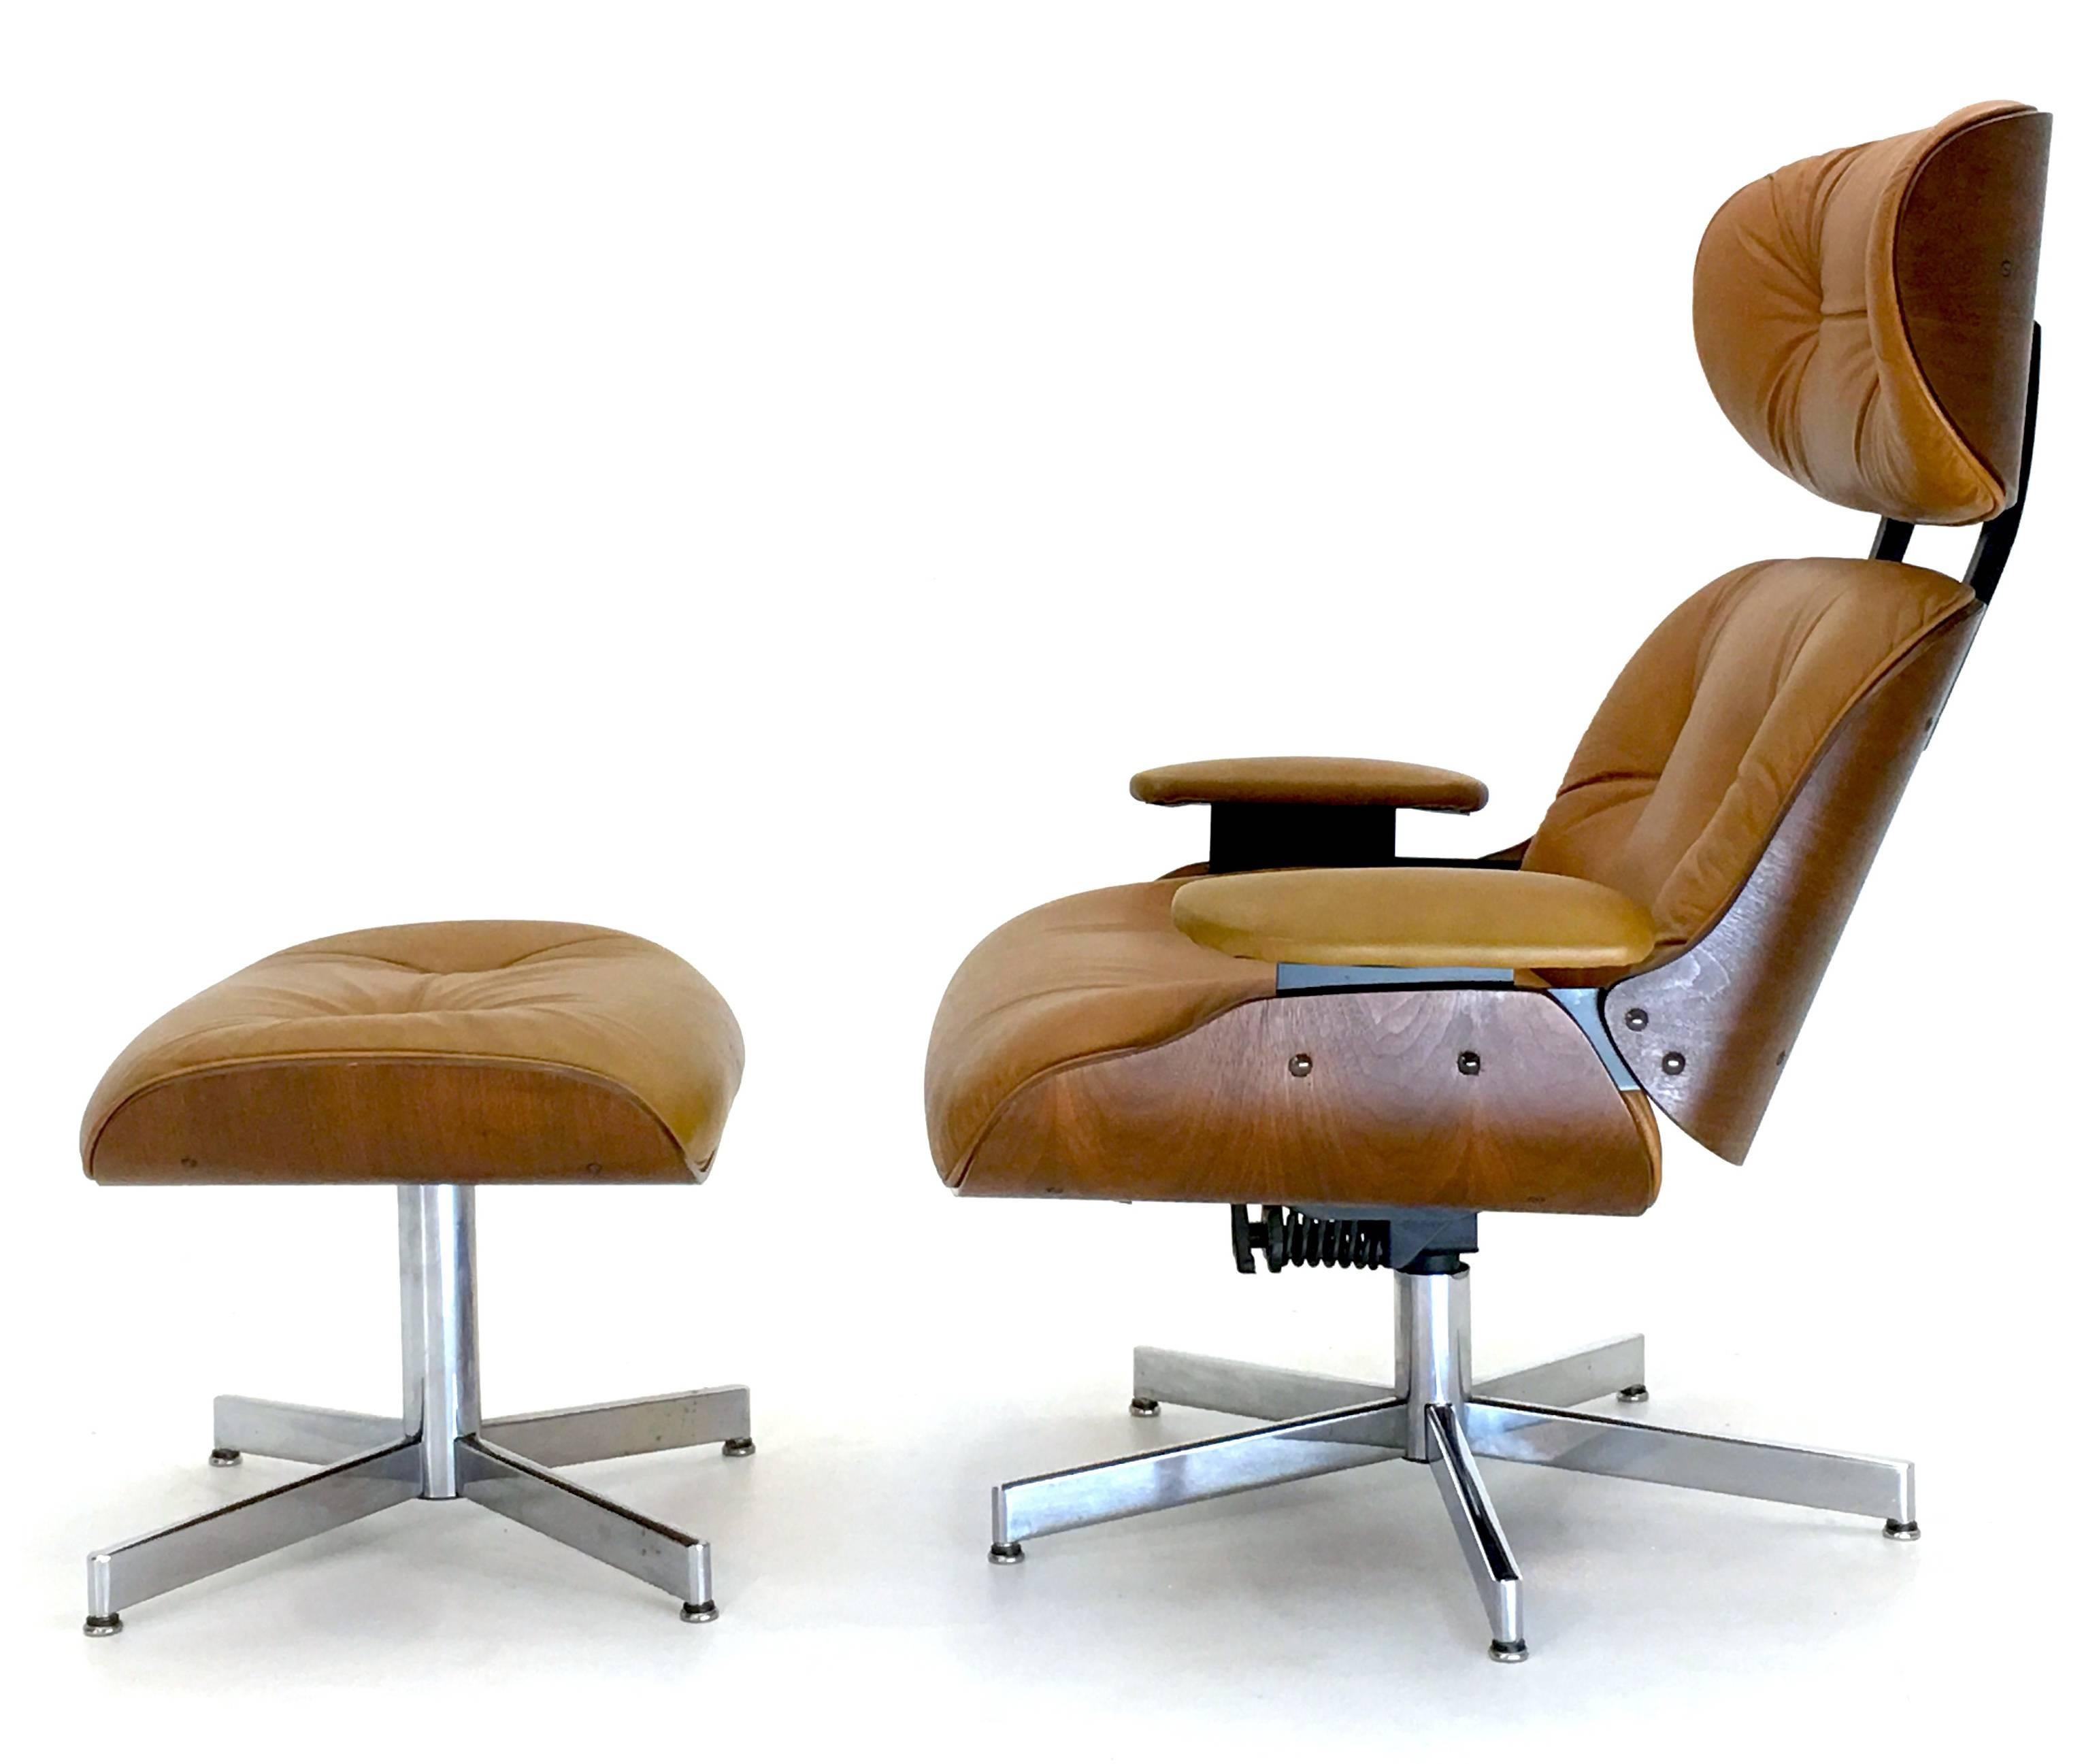 Produced in the 1960s-1970s by Plycraft for Selig by George Mulhauser as an alternative to the Ray and Charles Eames lounge chair.

This model features the ability to recline back, has quality chromed leg bases (not caps at the end) with curves